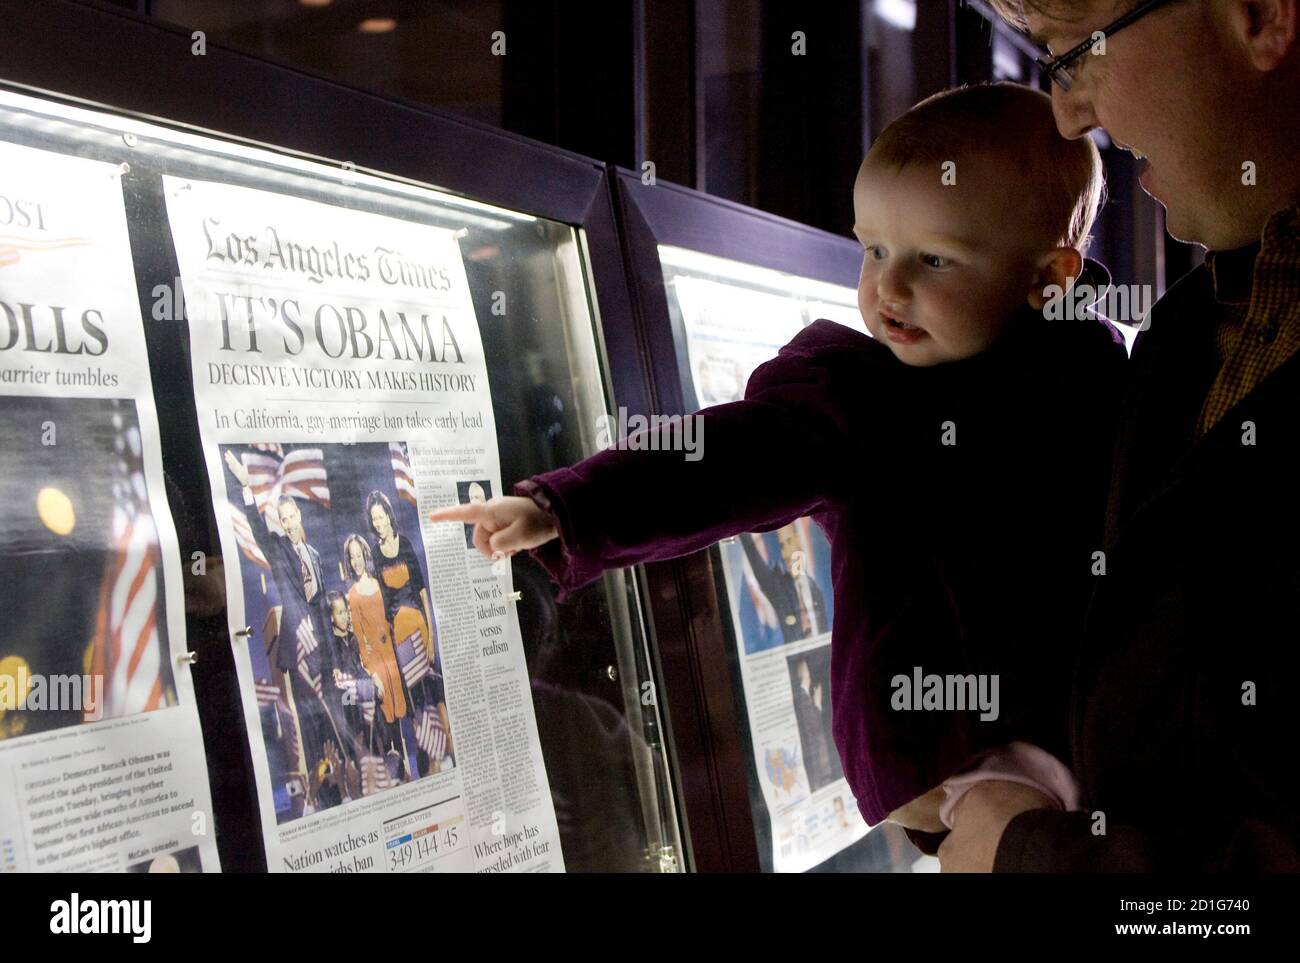 Nora Sherman, 18 months old, and her father Paul Sherman of Washington view the front pages of Wednesday's newspapers from around the world on display outside the Newseum in Washington November 5, 2008. Americans woke with joy, cautious optimism and frank worry on Wednesday after the historic win by Democrat Barack Obama, who went from long shot to president-elect on the promise of change.   REUTERS/Molly Riley   (UNITED STATES) Stock Photo